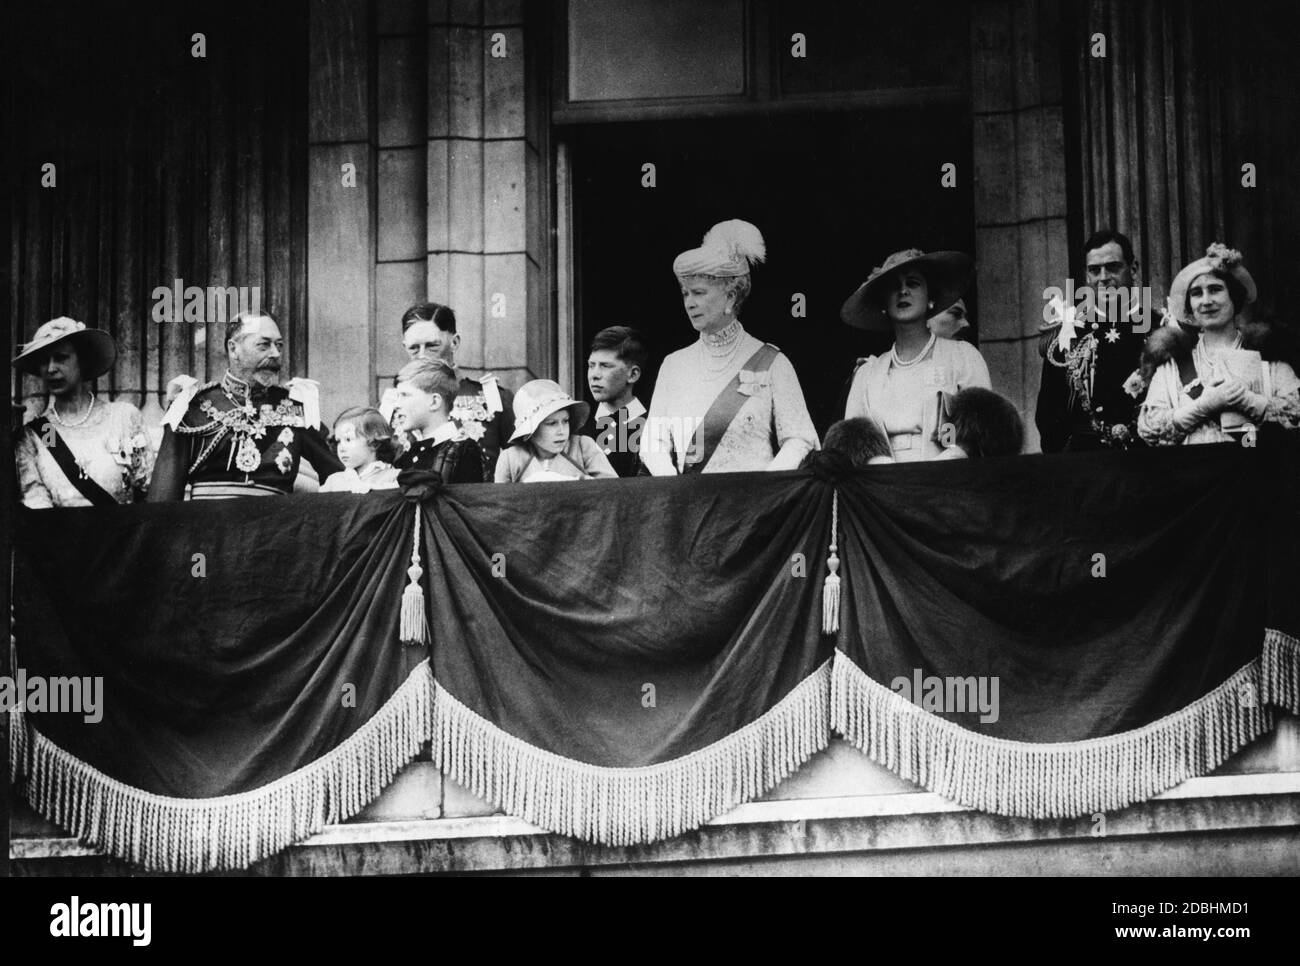 From left to right: Princess Mary, the former King George V, Princess Margaret Rose, Gerald Lascelles, Count George Lascelles of Harewood, Princess Elizabeth, Viscount Lascelles, the former Queen Mary, Countess Mary of Kent, Count Henry of Gloucester, Count George of Kent and Countess Elizabeth of York. Stock Photo